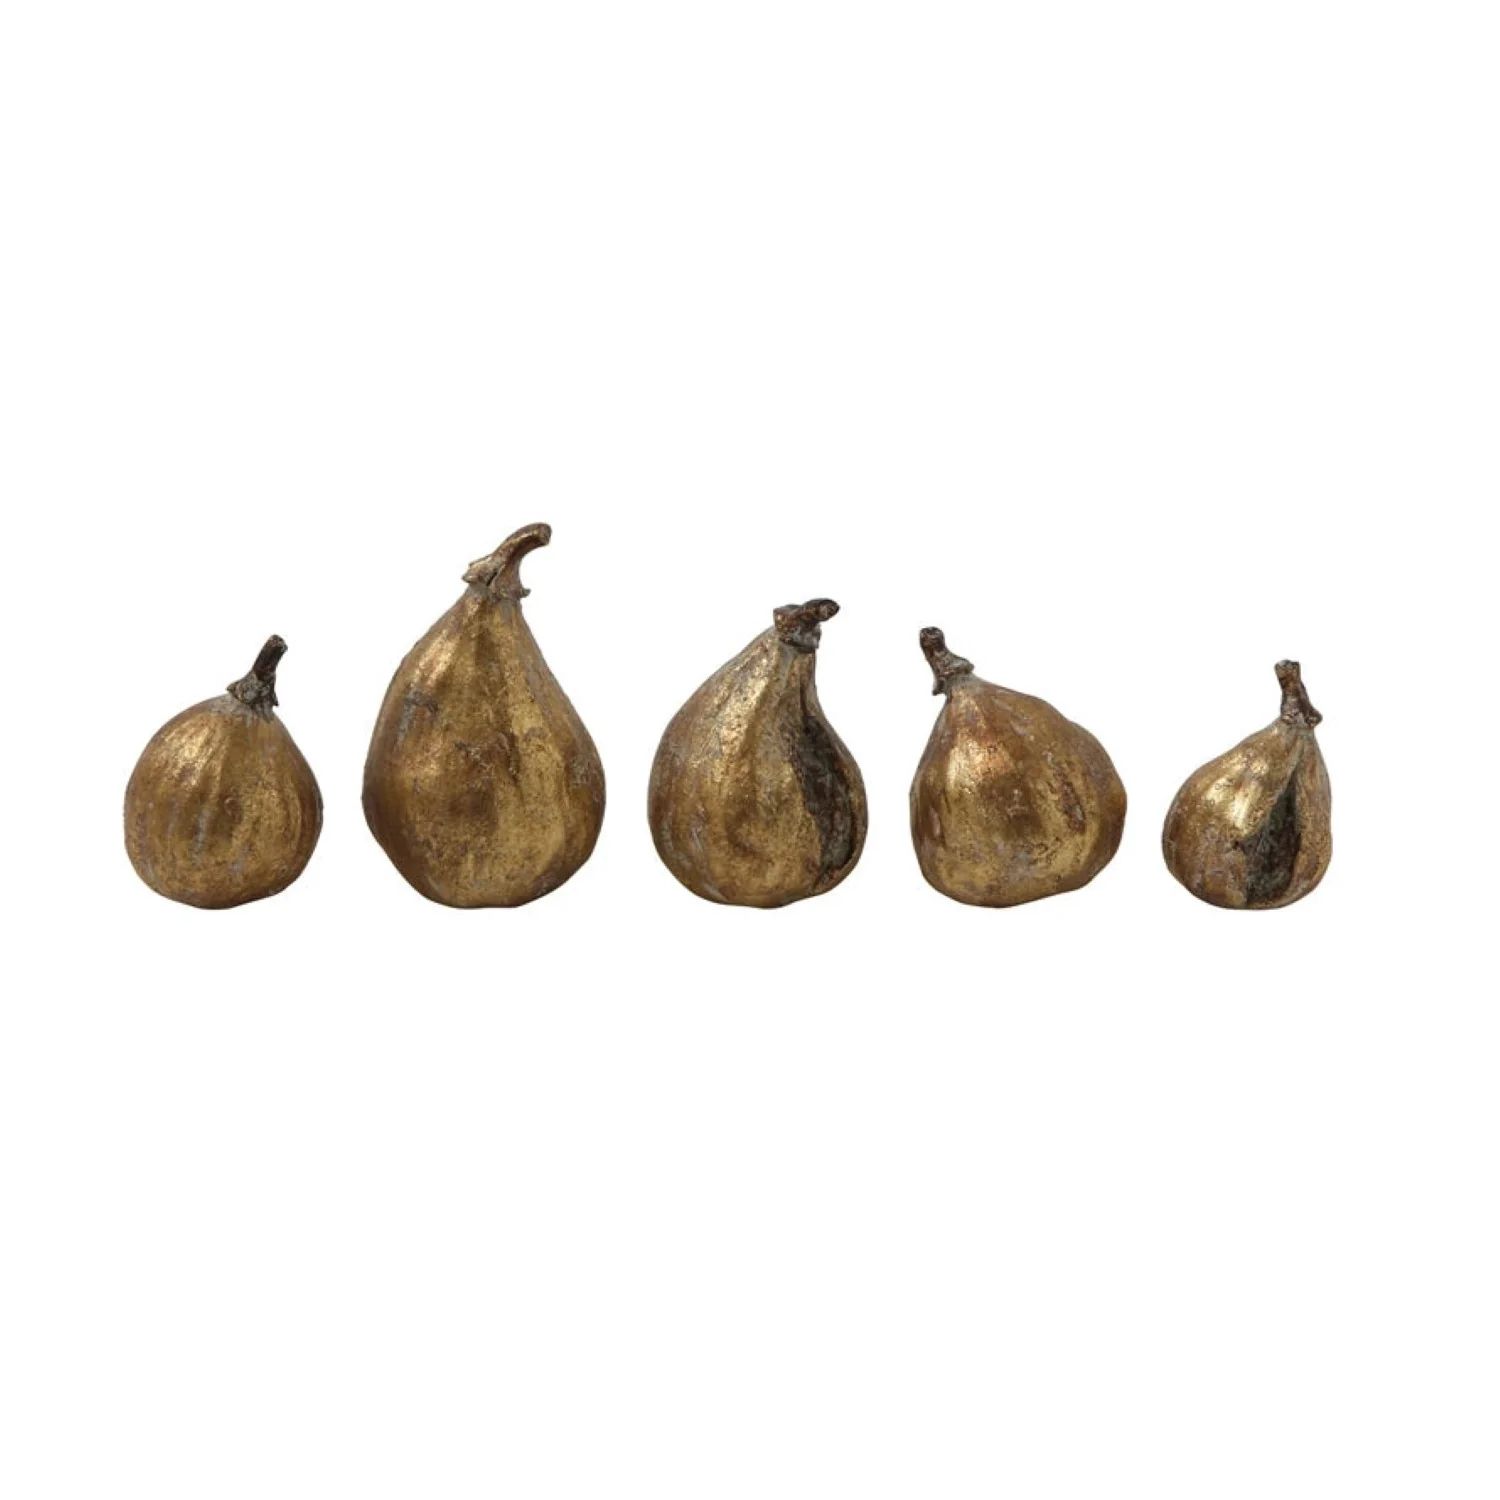 Resin Figs with Antique Finish, Set of 5 | Burke Decor